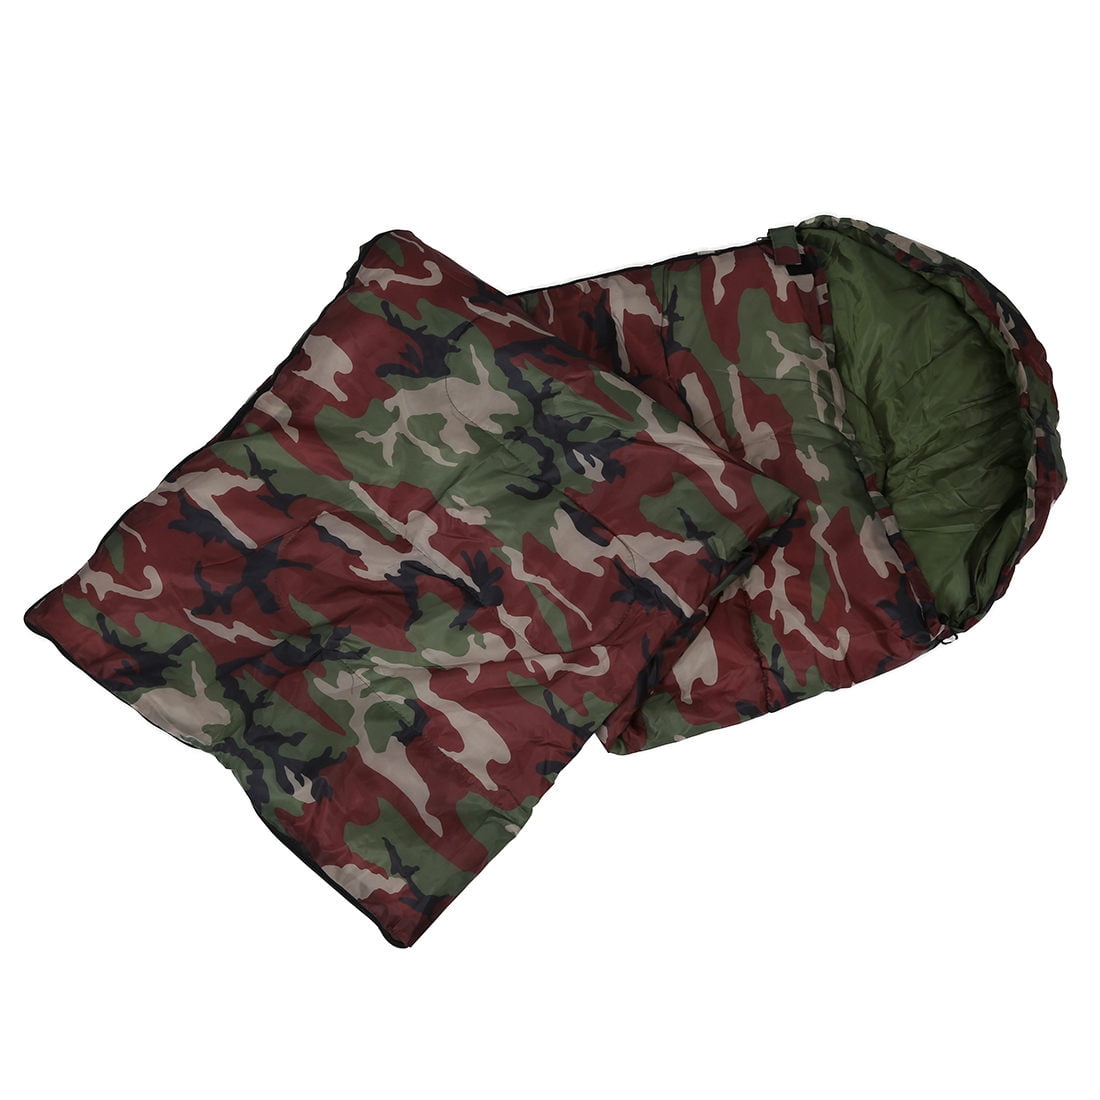 Details about   Cotton Camping Sleeping Bag Envelope Style Camouflage Sleeping Bags Outdoor Tool 